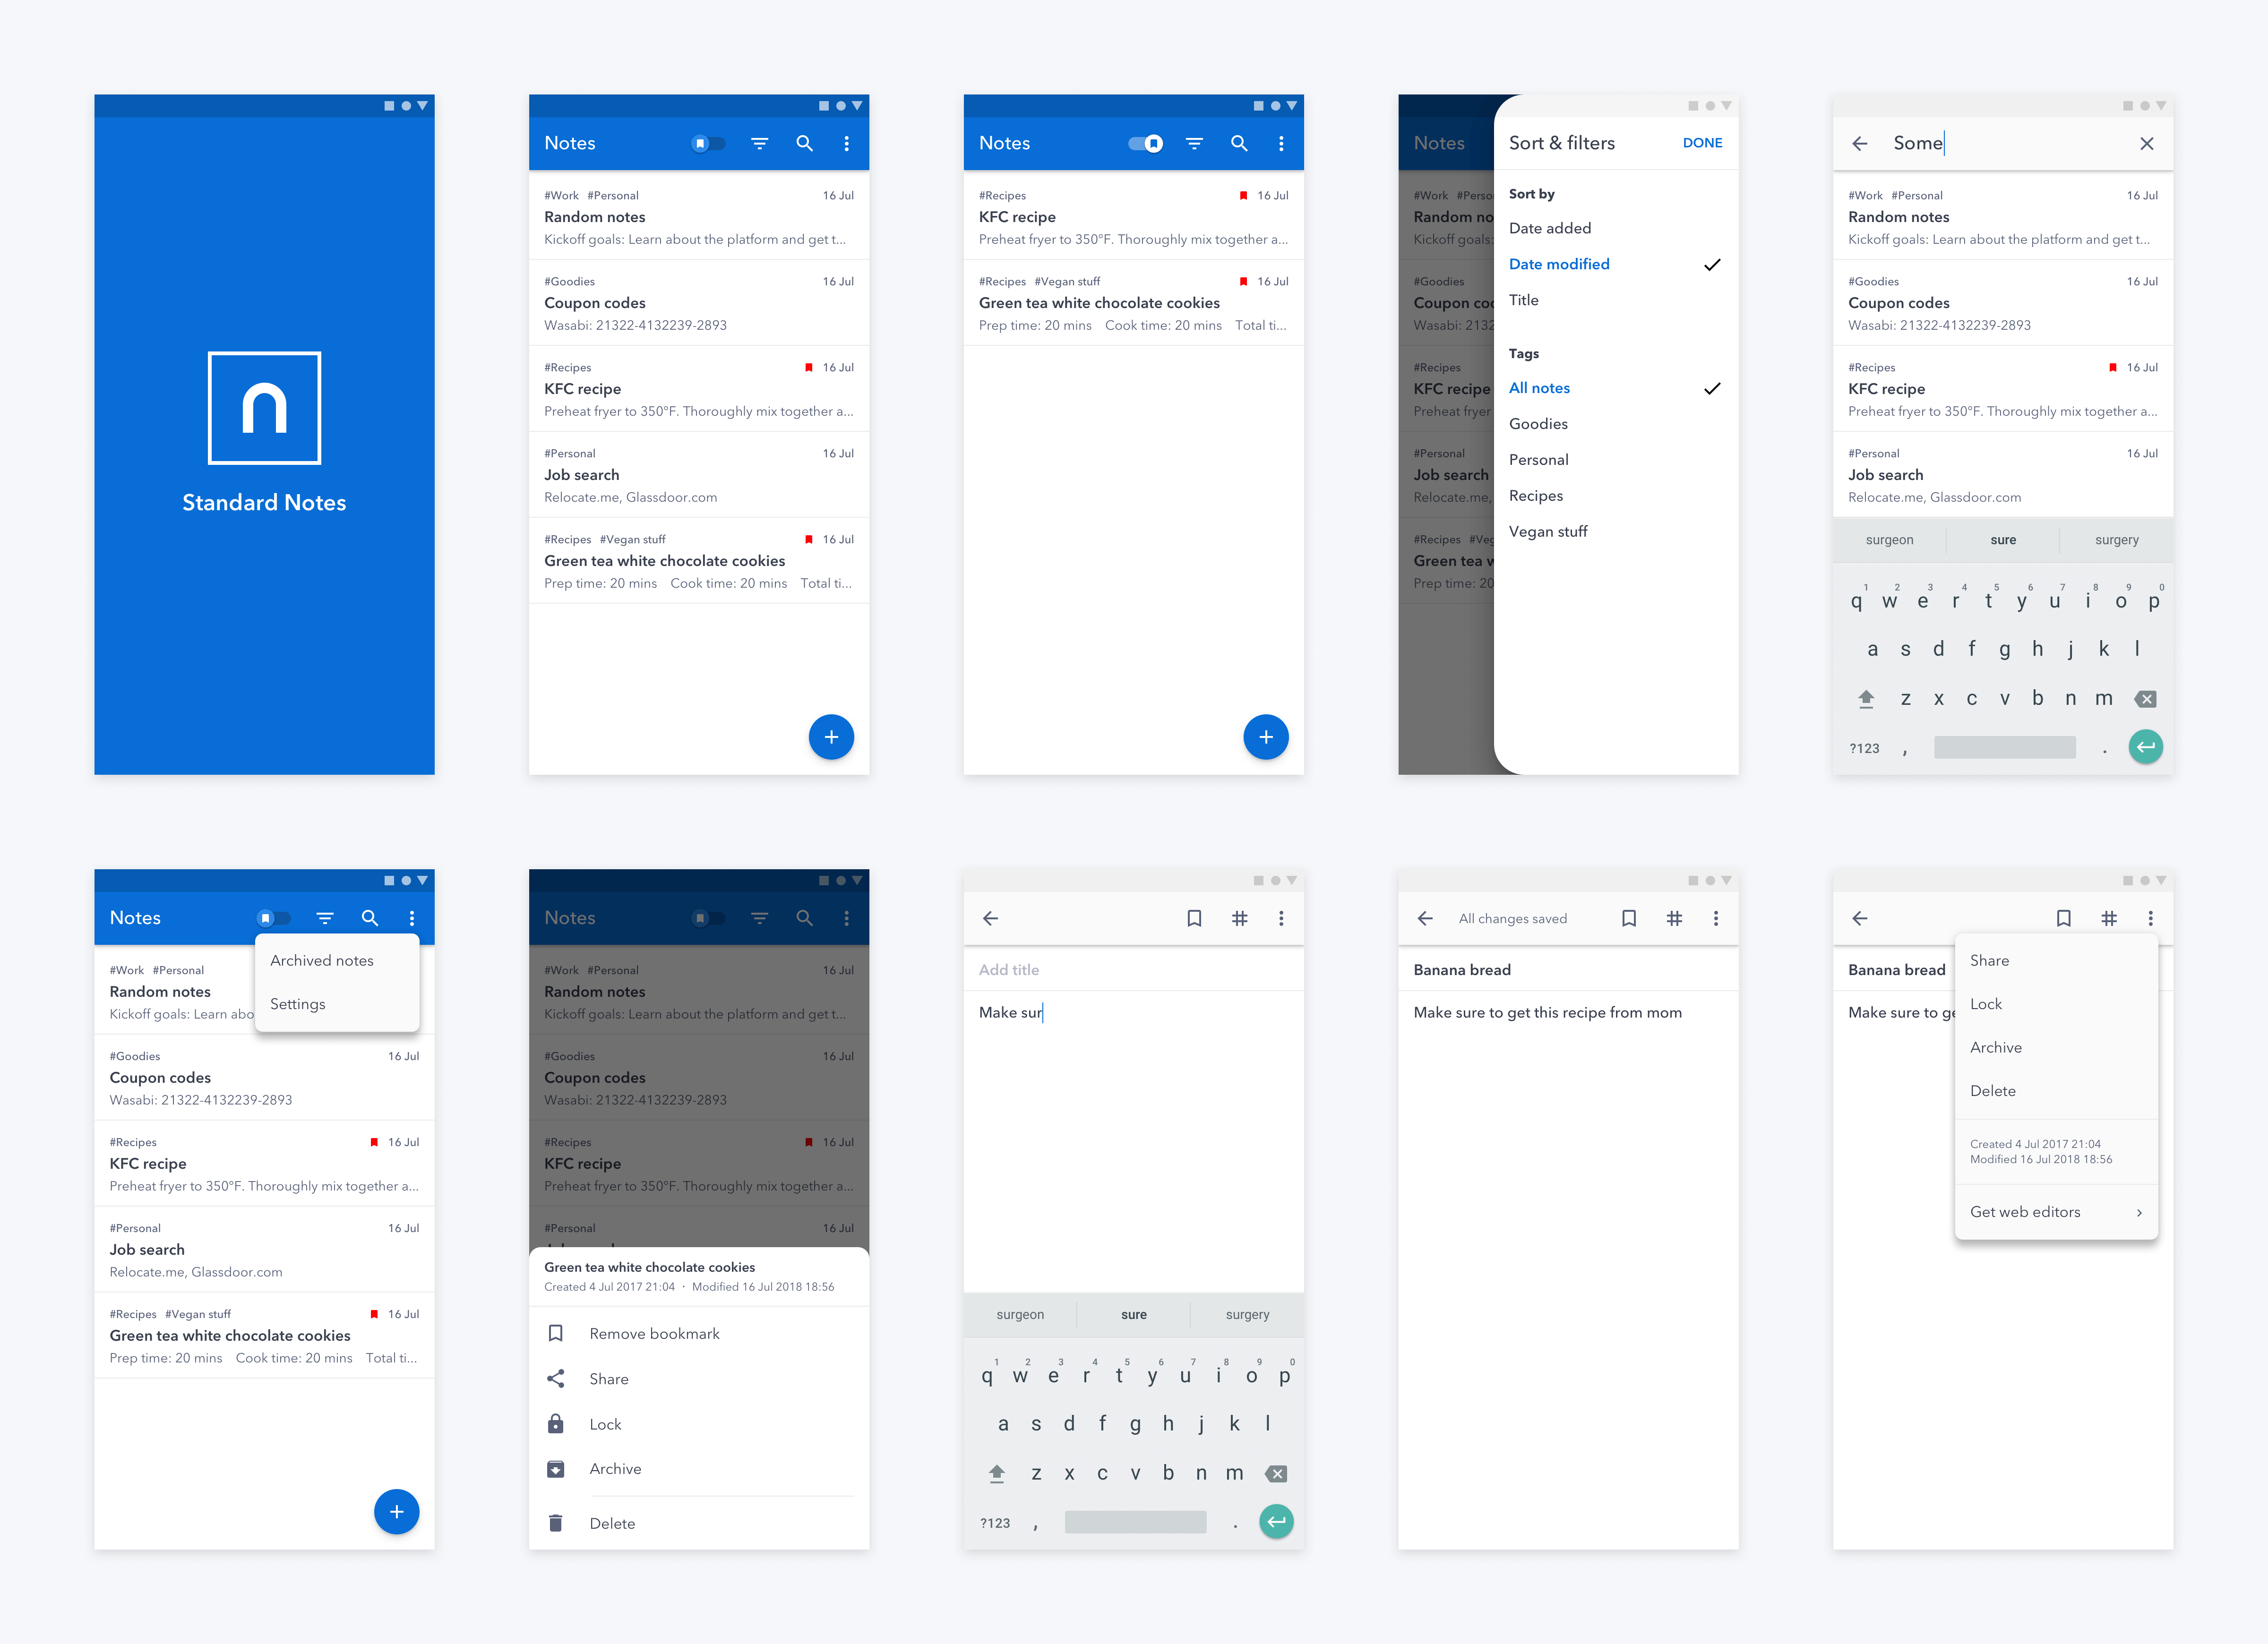 Ten of Standard Notes screens I redesigned showing the list, navigation, search, note details & other UI elements.